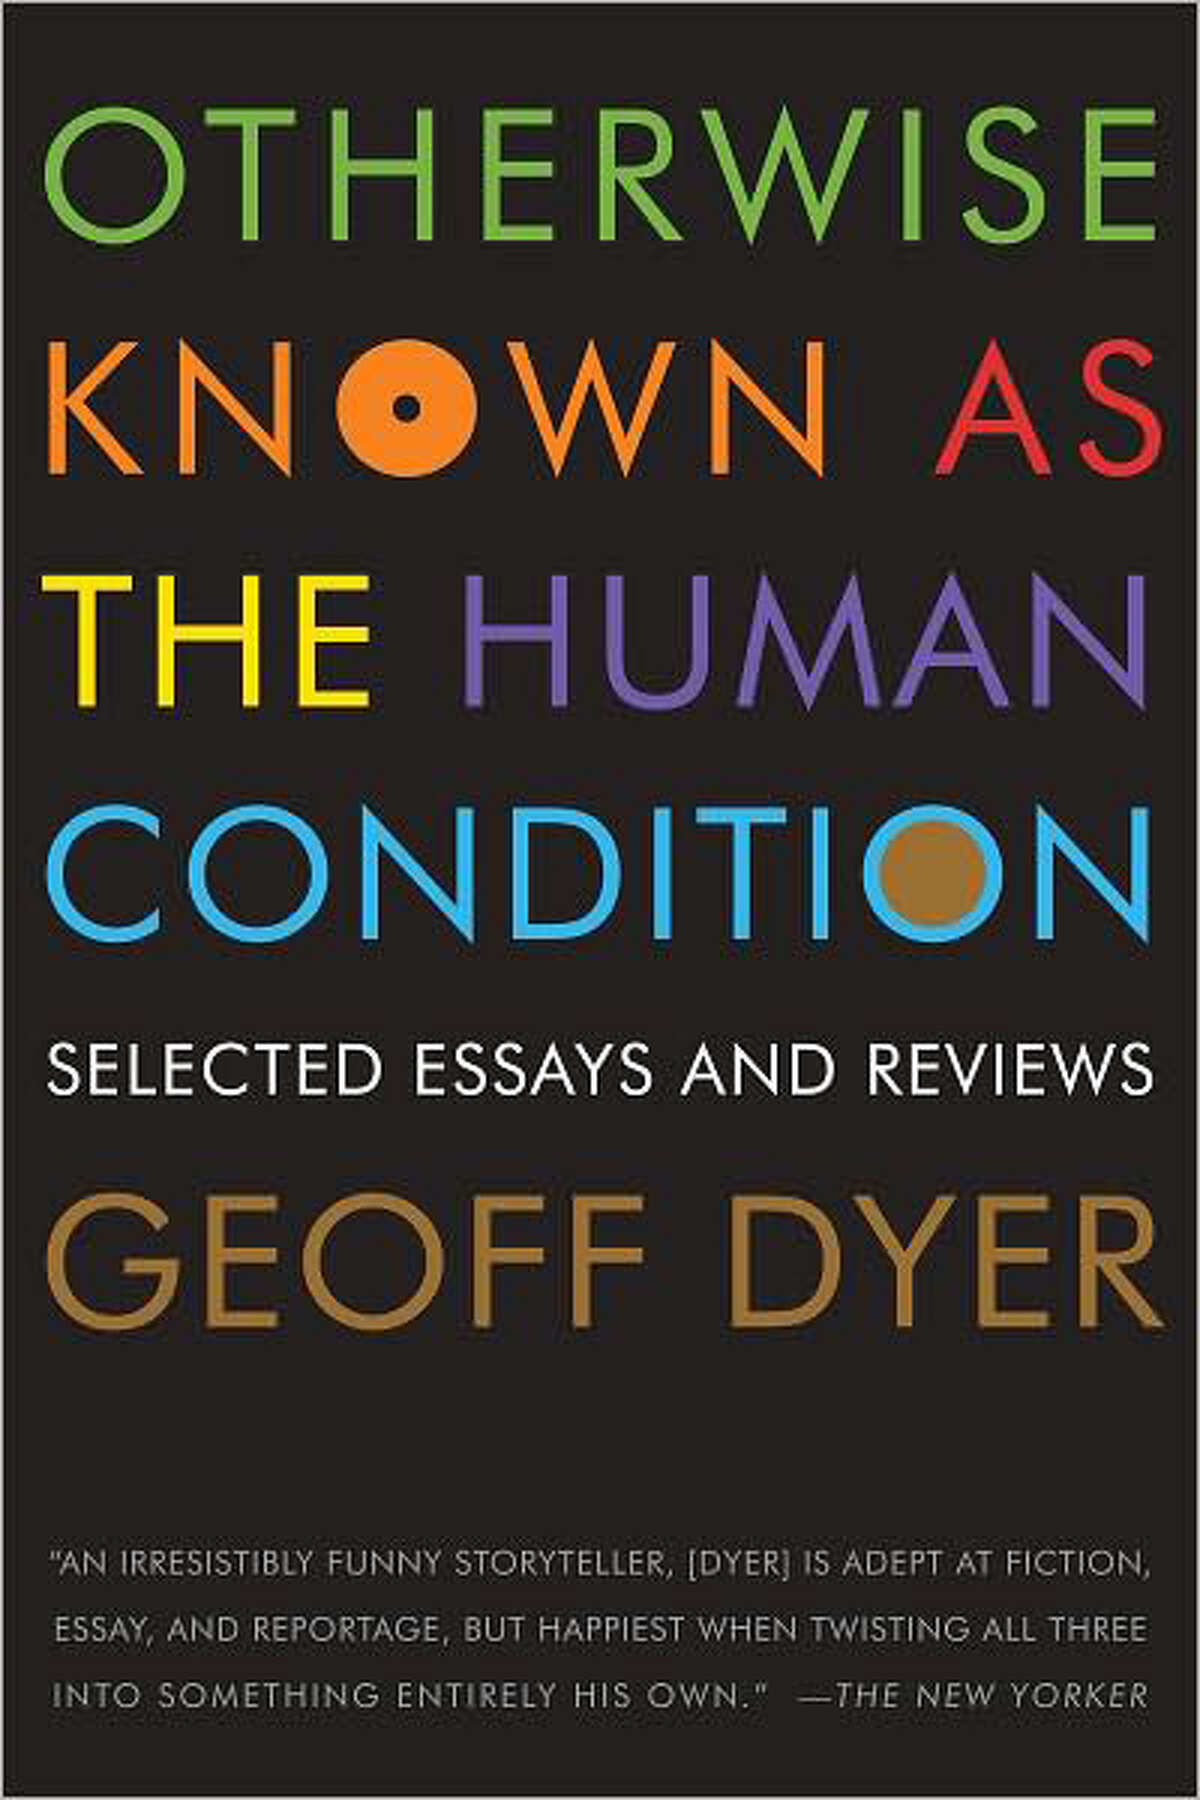 "Otherwise Known as the Human Condition" by Geoff Dyer